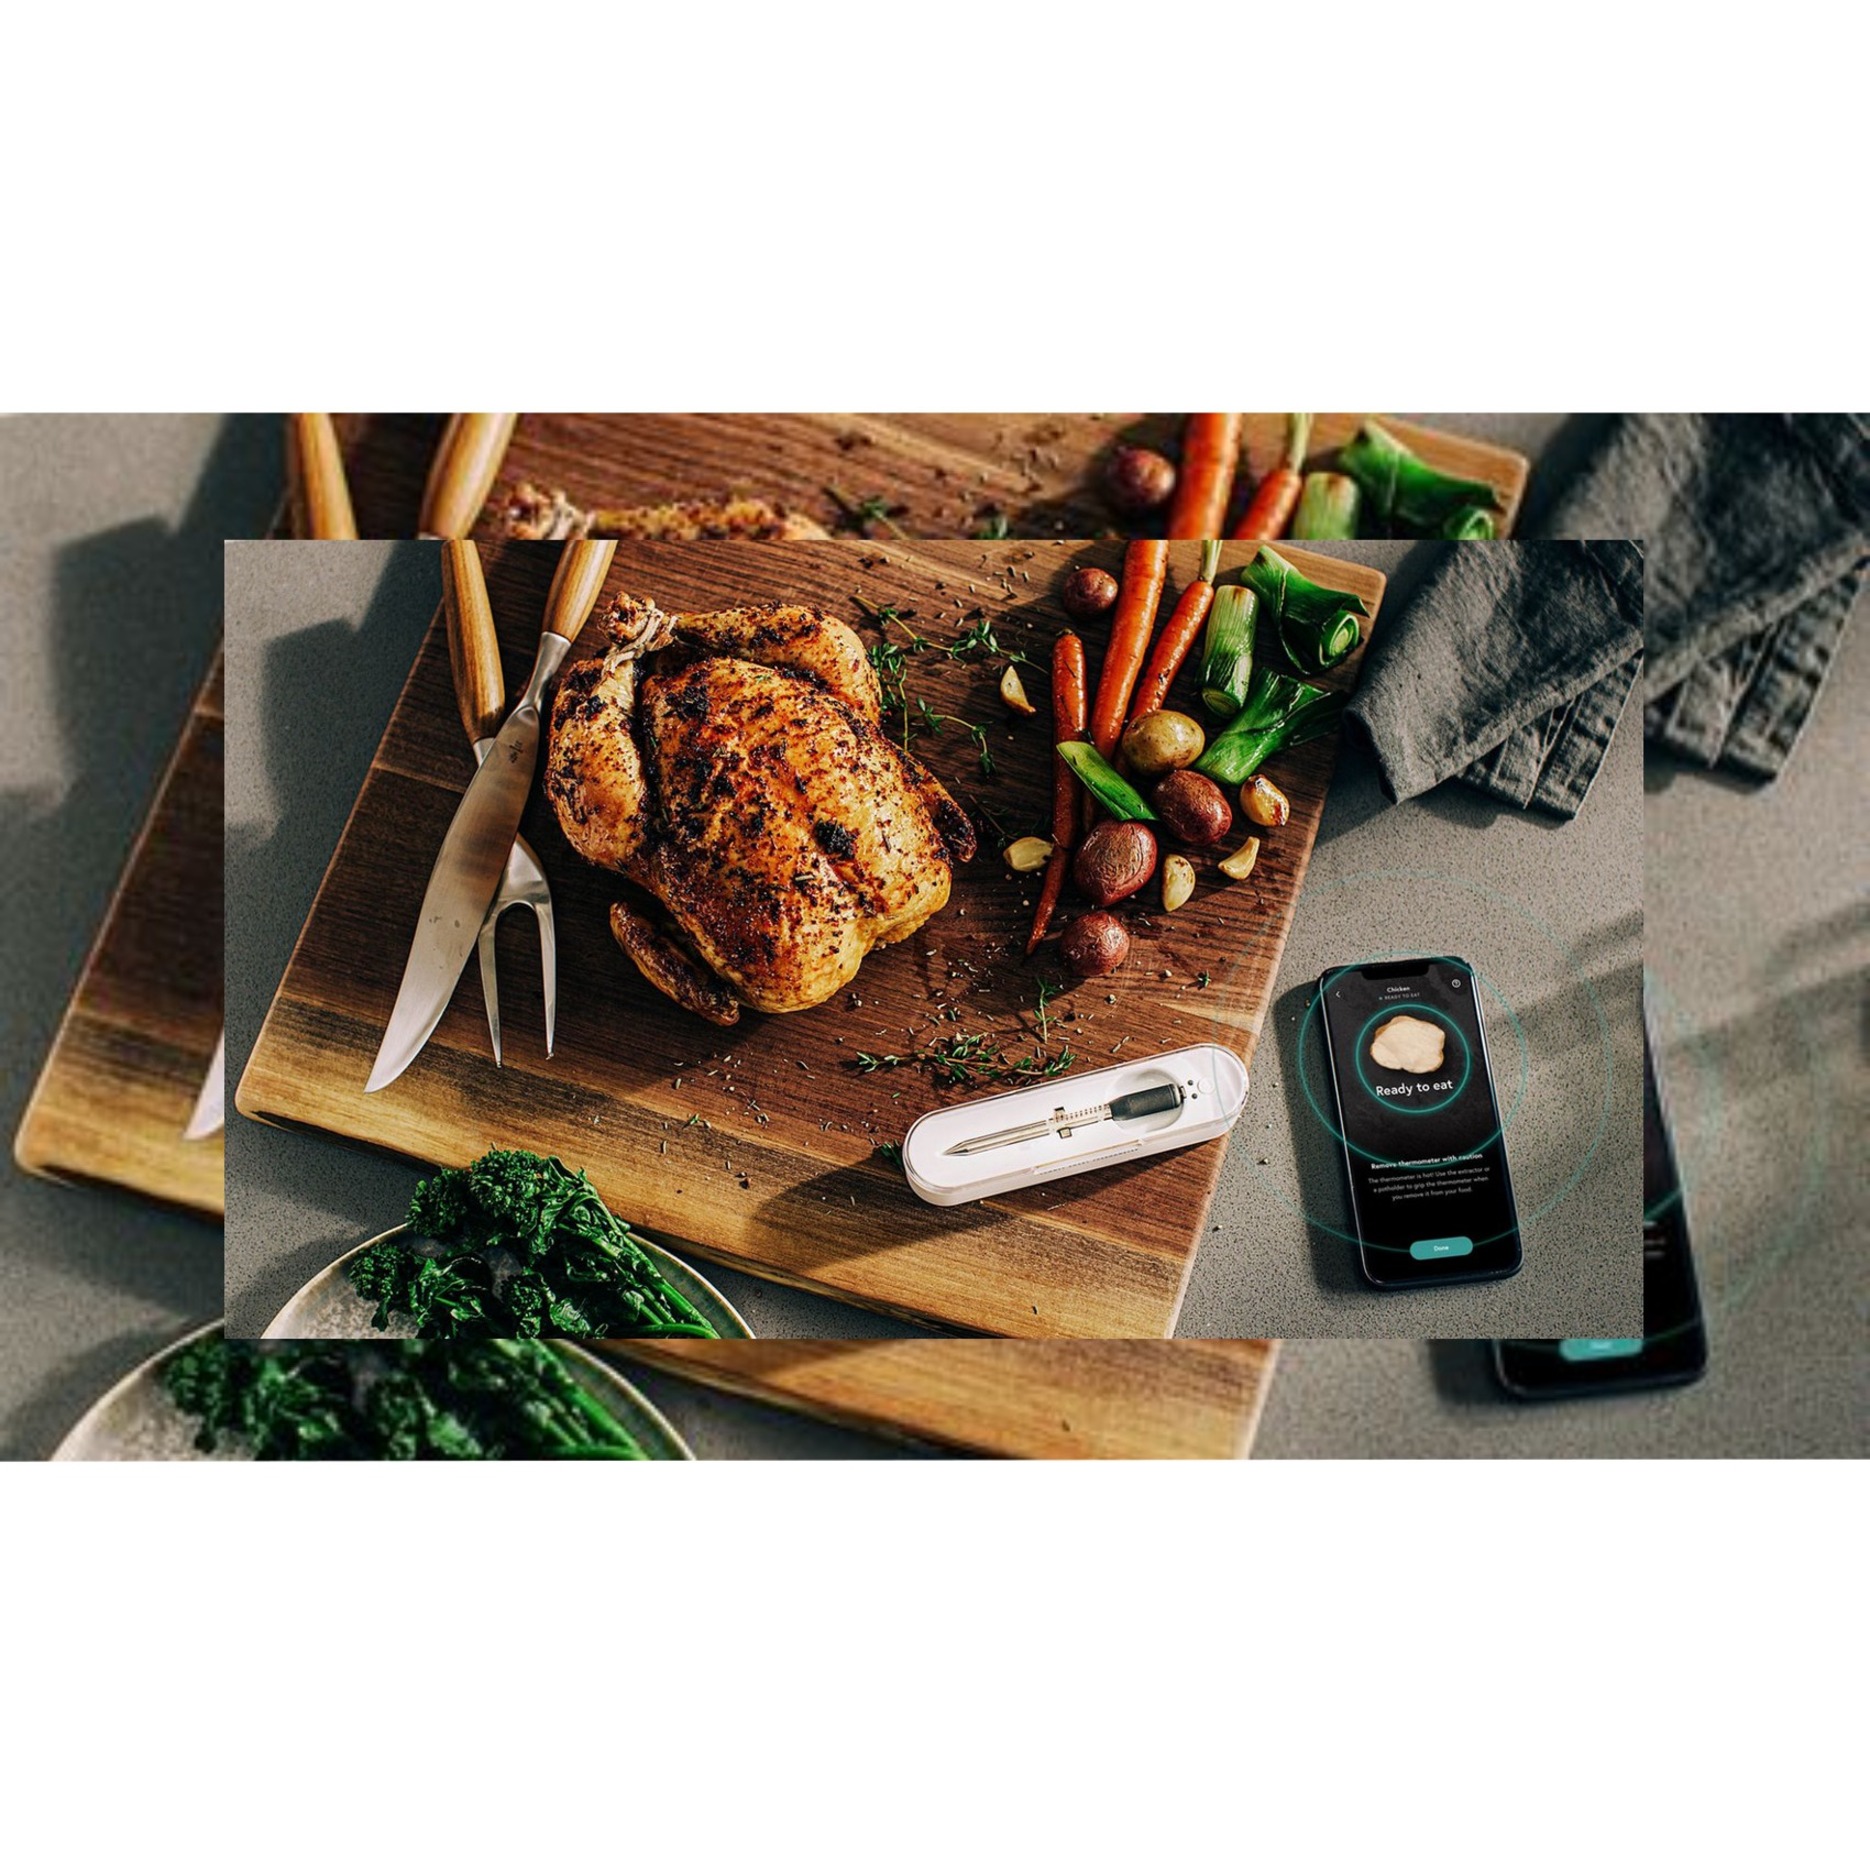 Yummly® Smart Meat Thermometer with Wireless Bluetooth Connectivity - image 3 of 6